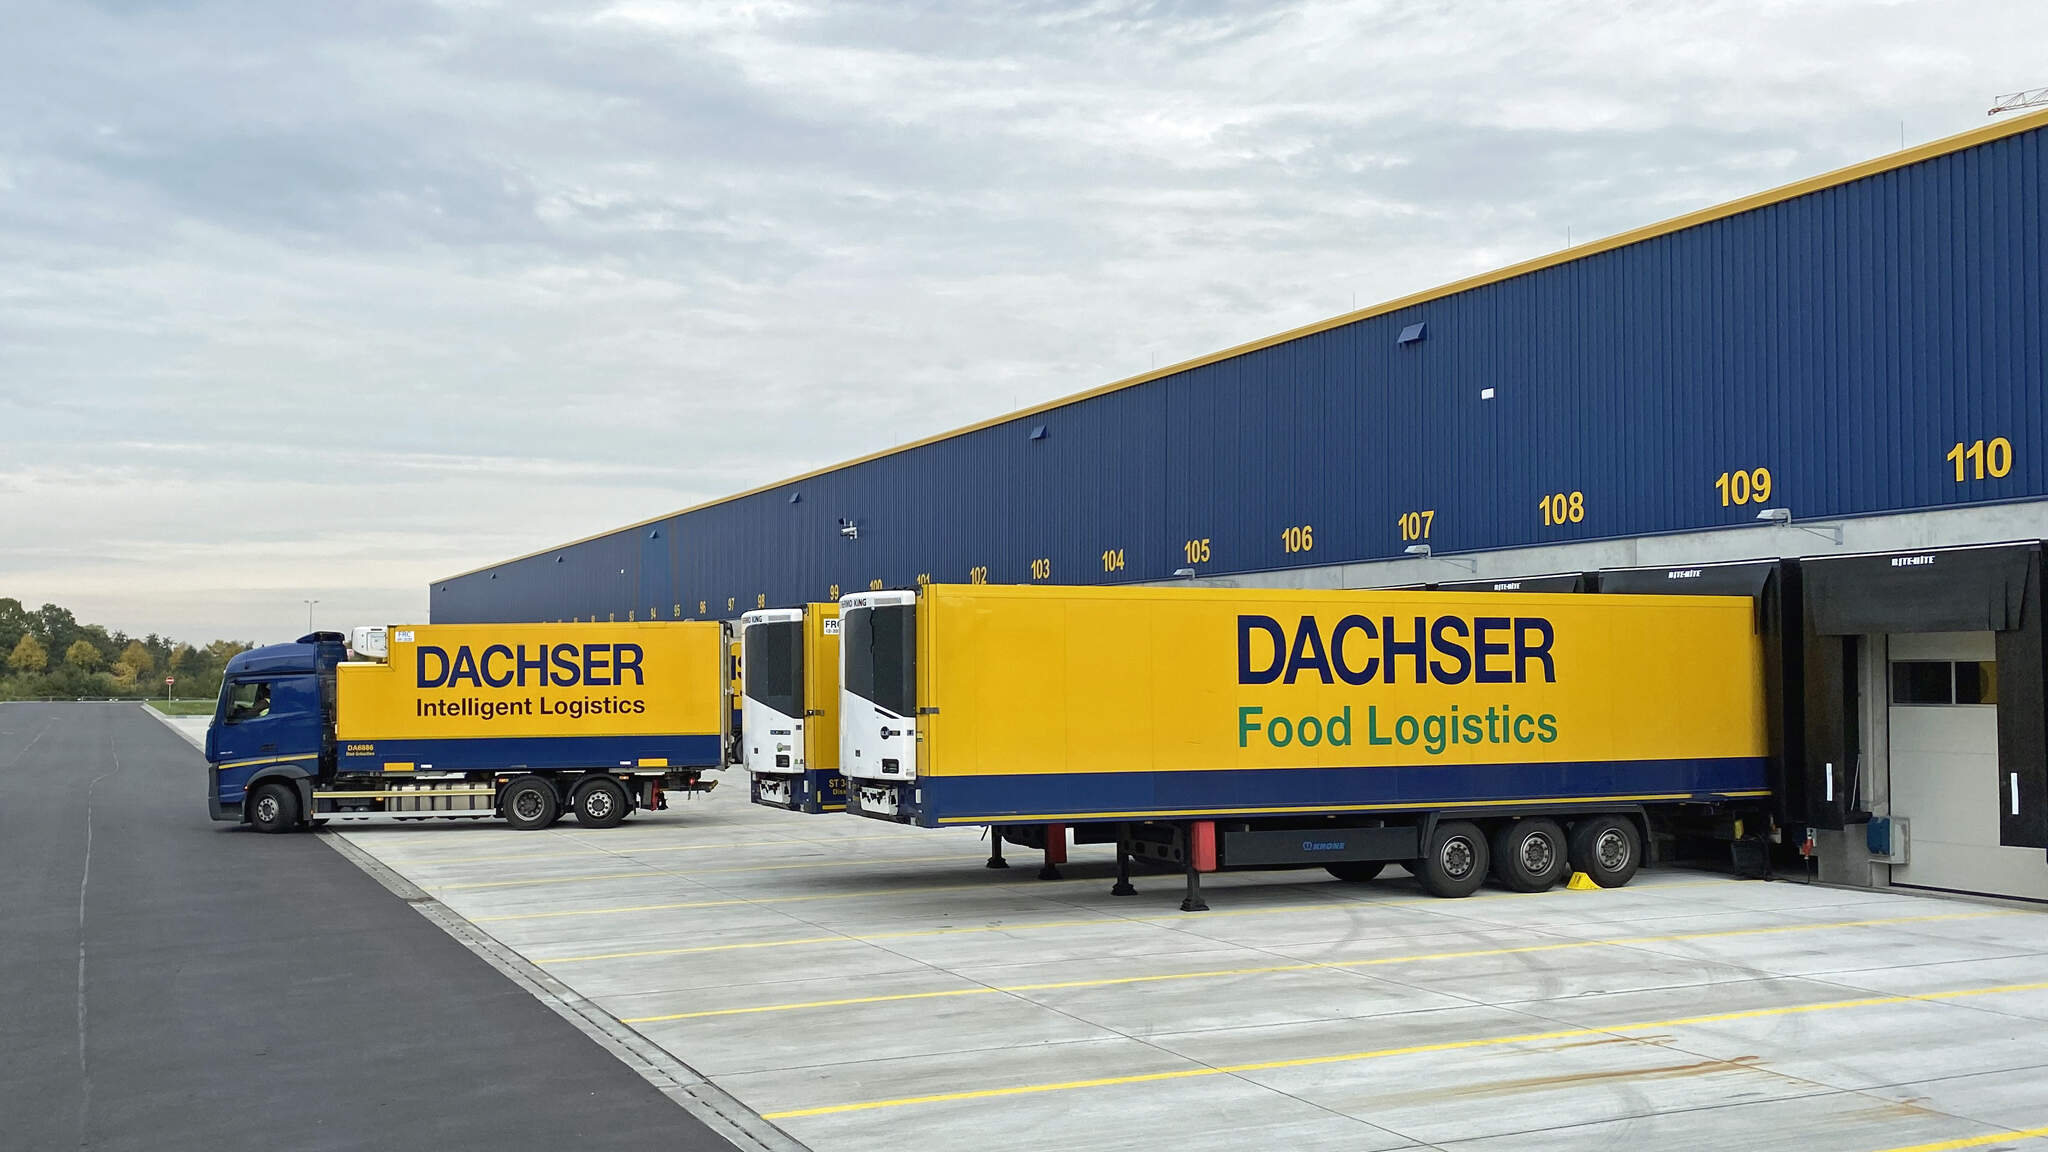 DACHSER has opened a new branch in Neumünster